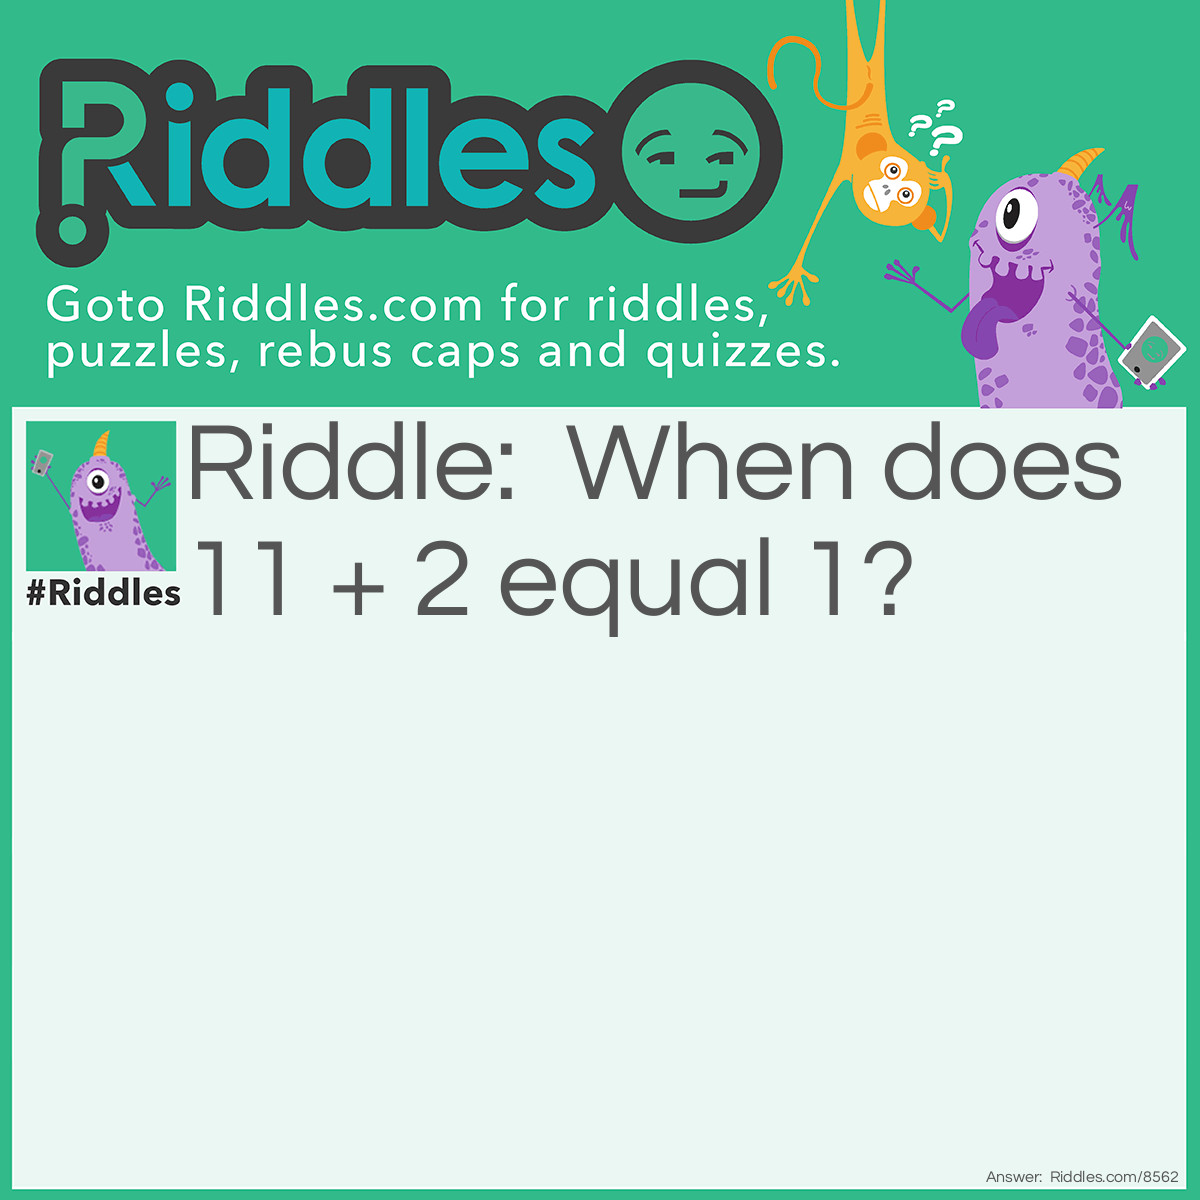 Riddle: When does 11 + 2 equal 1? Answer: On a clock!